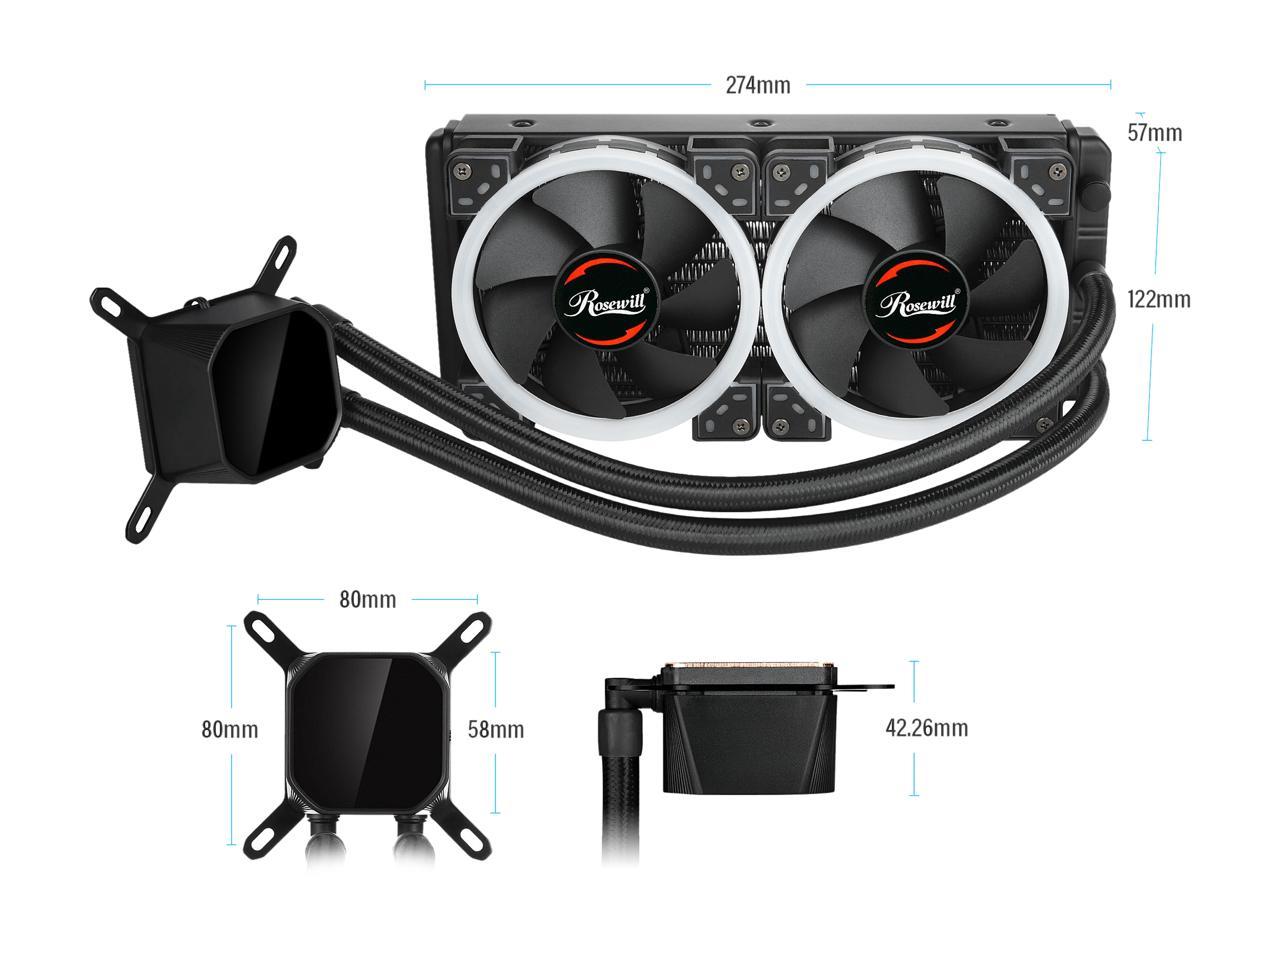 Rosewill Rgb Aio 240mm Cpu Liquid Cooler Closed Loop Pc Water Cooling